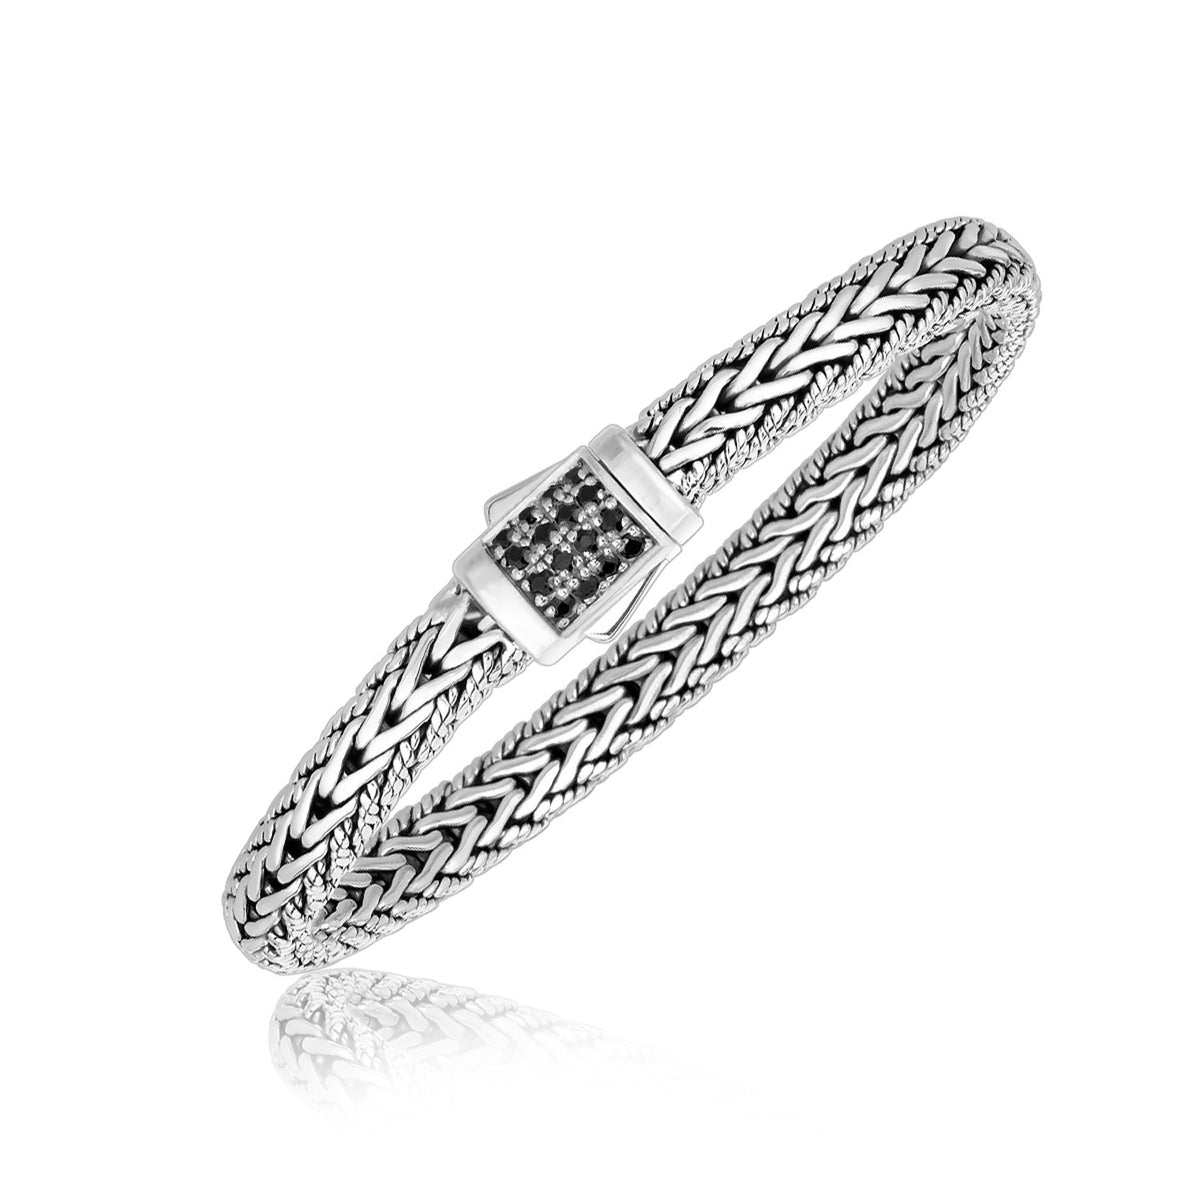 Braided Style Mens Bracelet with Black Sapphire Accents - Sterling Silver 1.70mm